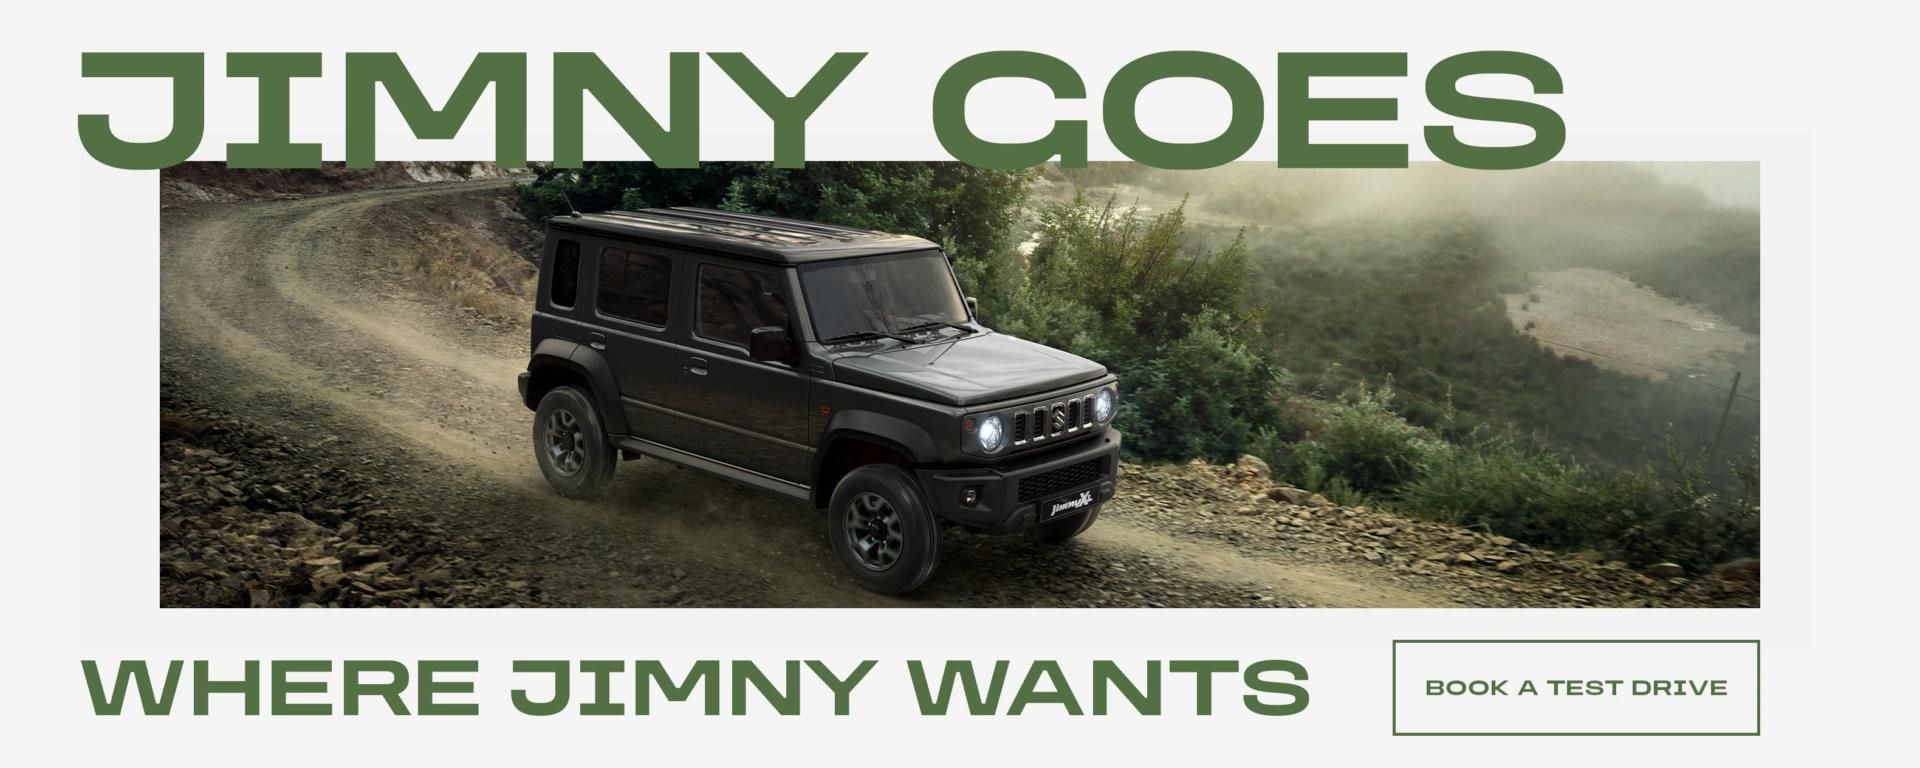 JIMNY XL - OUR OFF-ROAD LEGEND, UPSIZED TO 5 DOORS